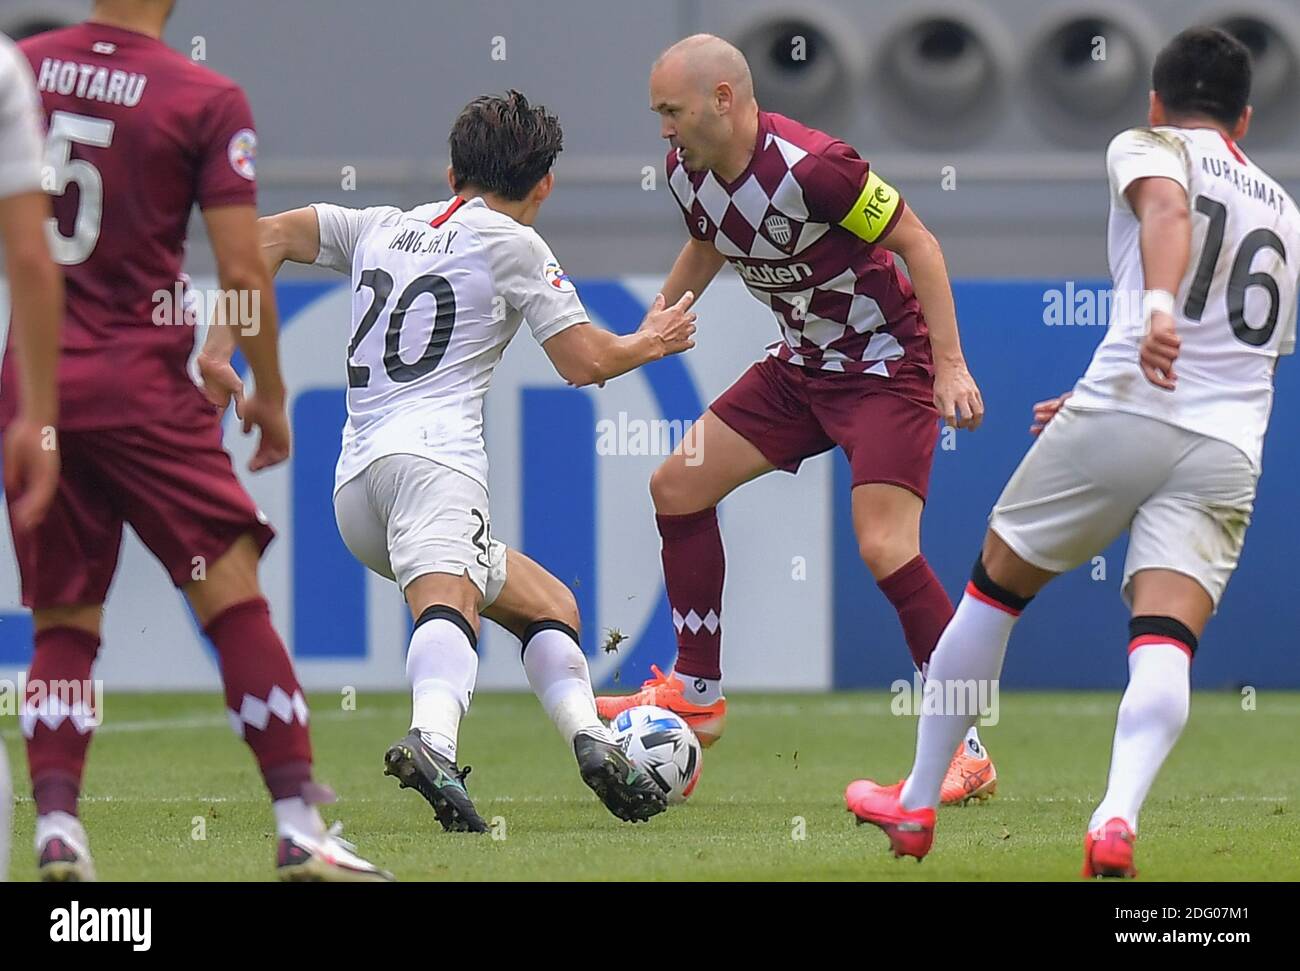 Doha, Qatar. 7th Dec, 2020. Andres Iniesta (2nd R) of Vissel Kobe competes during the round of 16 match of the AFC Champions League between Shanghai SIPG FC of China and Vissel Kobe of Japan in Doha, Qatar, Dec. 7, 2020. Credit: Nikku/Xinhua/Alamy Live News Stock Photo